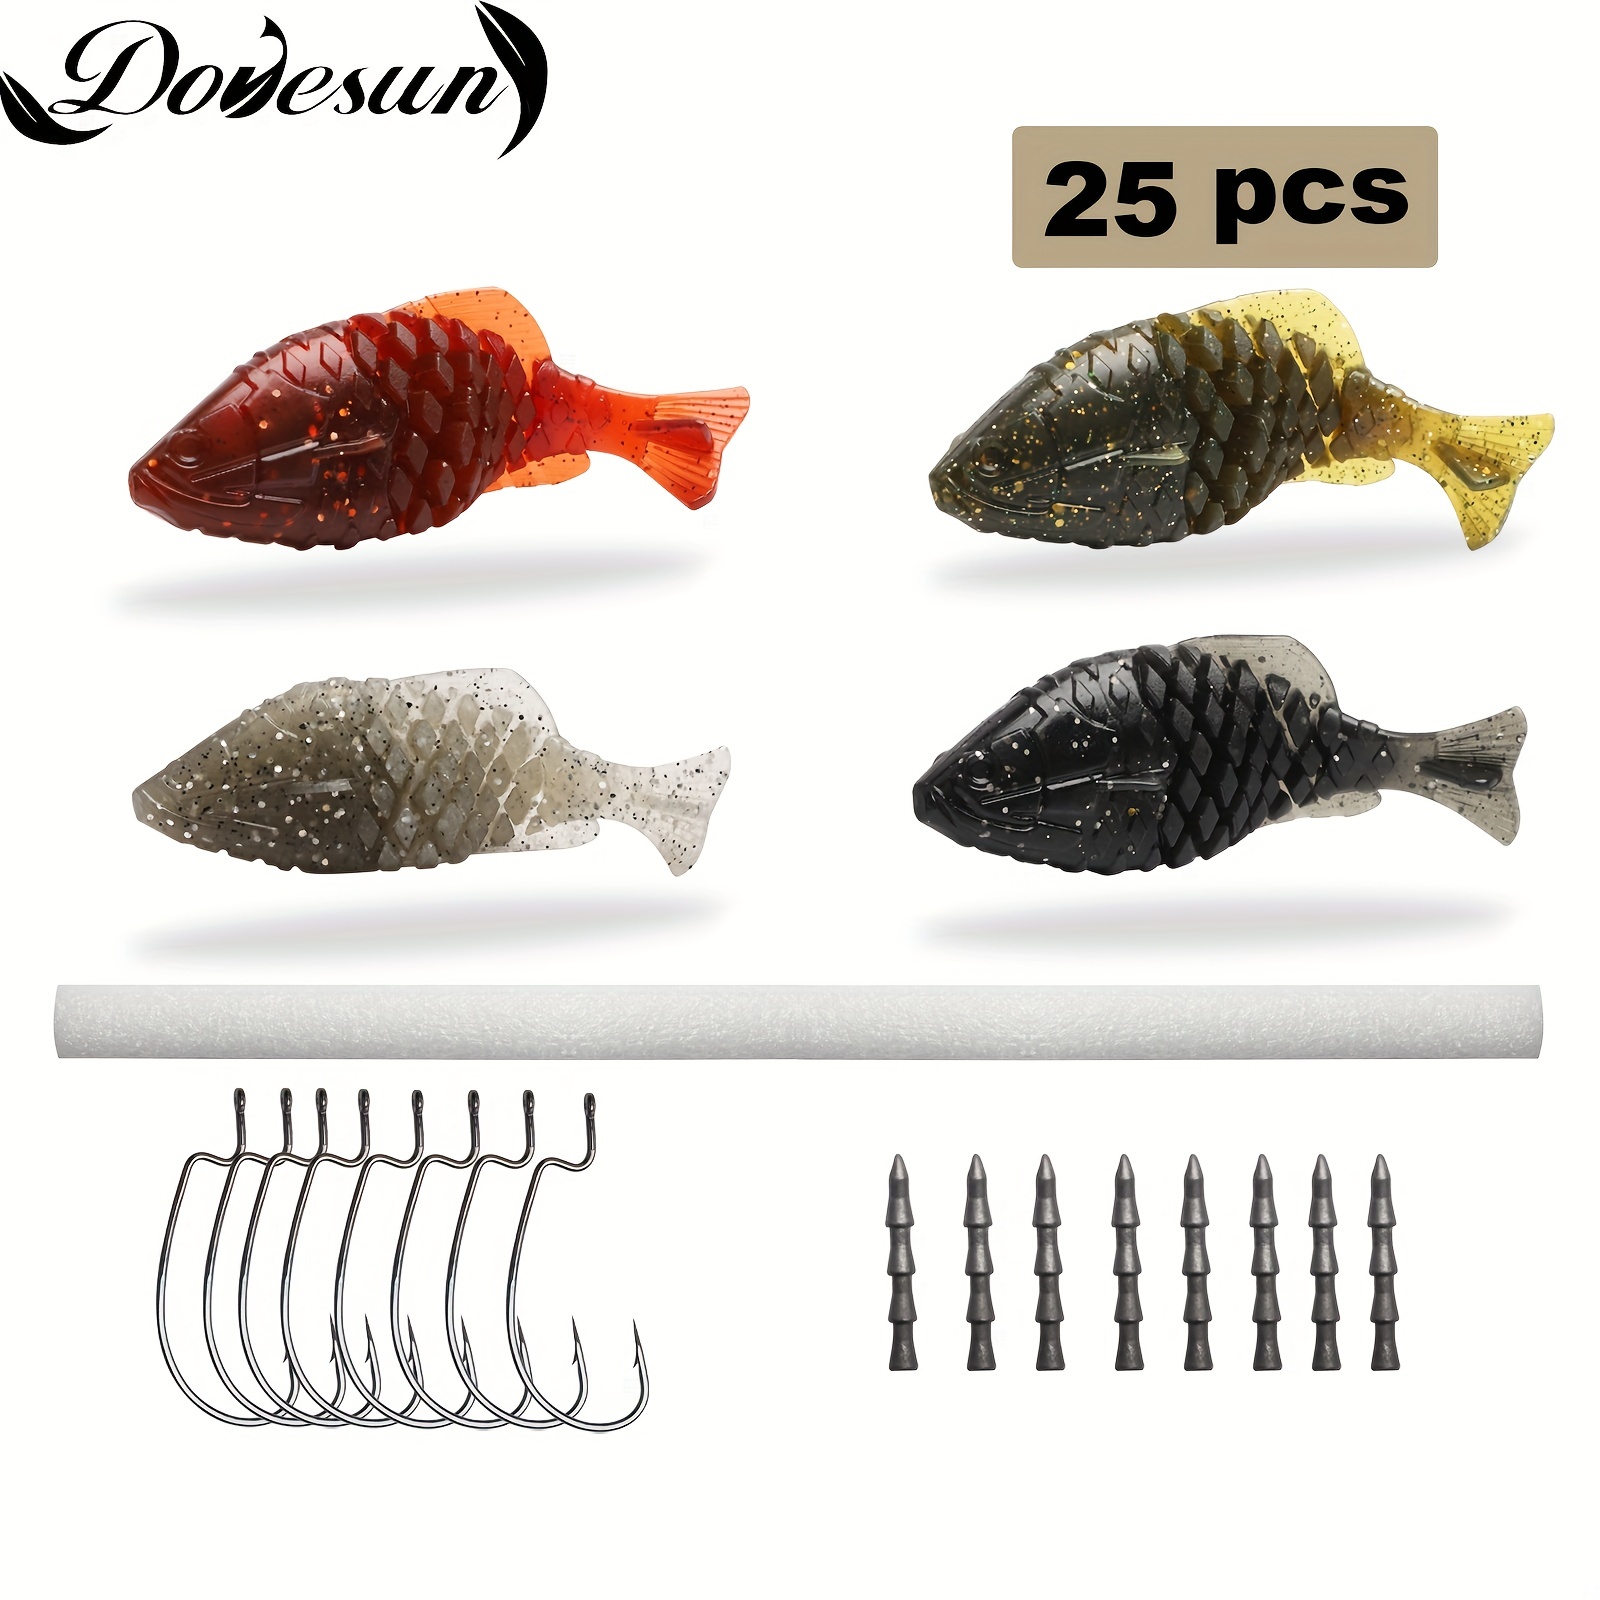  Freshwater Fishing Tackle Kit, Bass Fishing Kit with Tackle  Box Includes Crankbaits, Spinner Baits, Plastic Worms, Jigs, Topwater Lures,  Spoon Lures, Fishing Gear Kit for Trout Salmon Catfish (190pcs) 